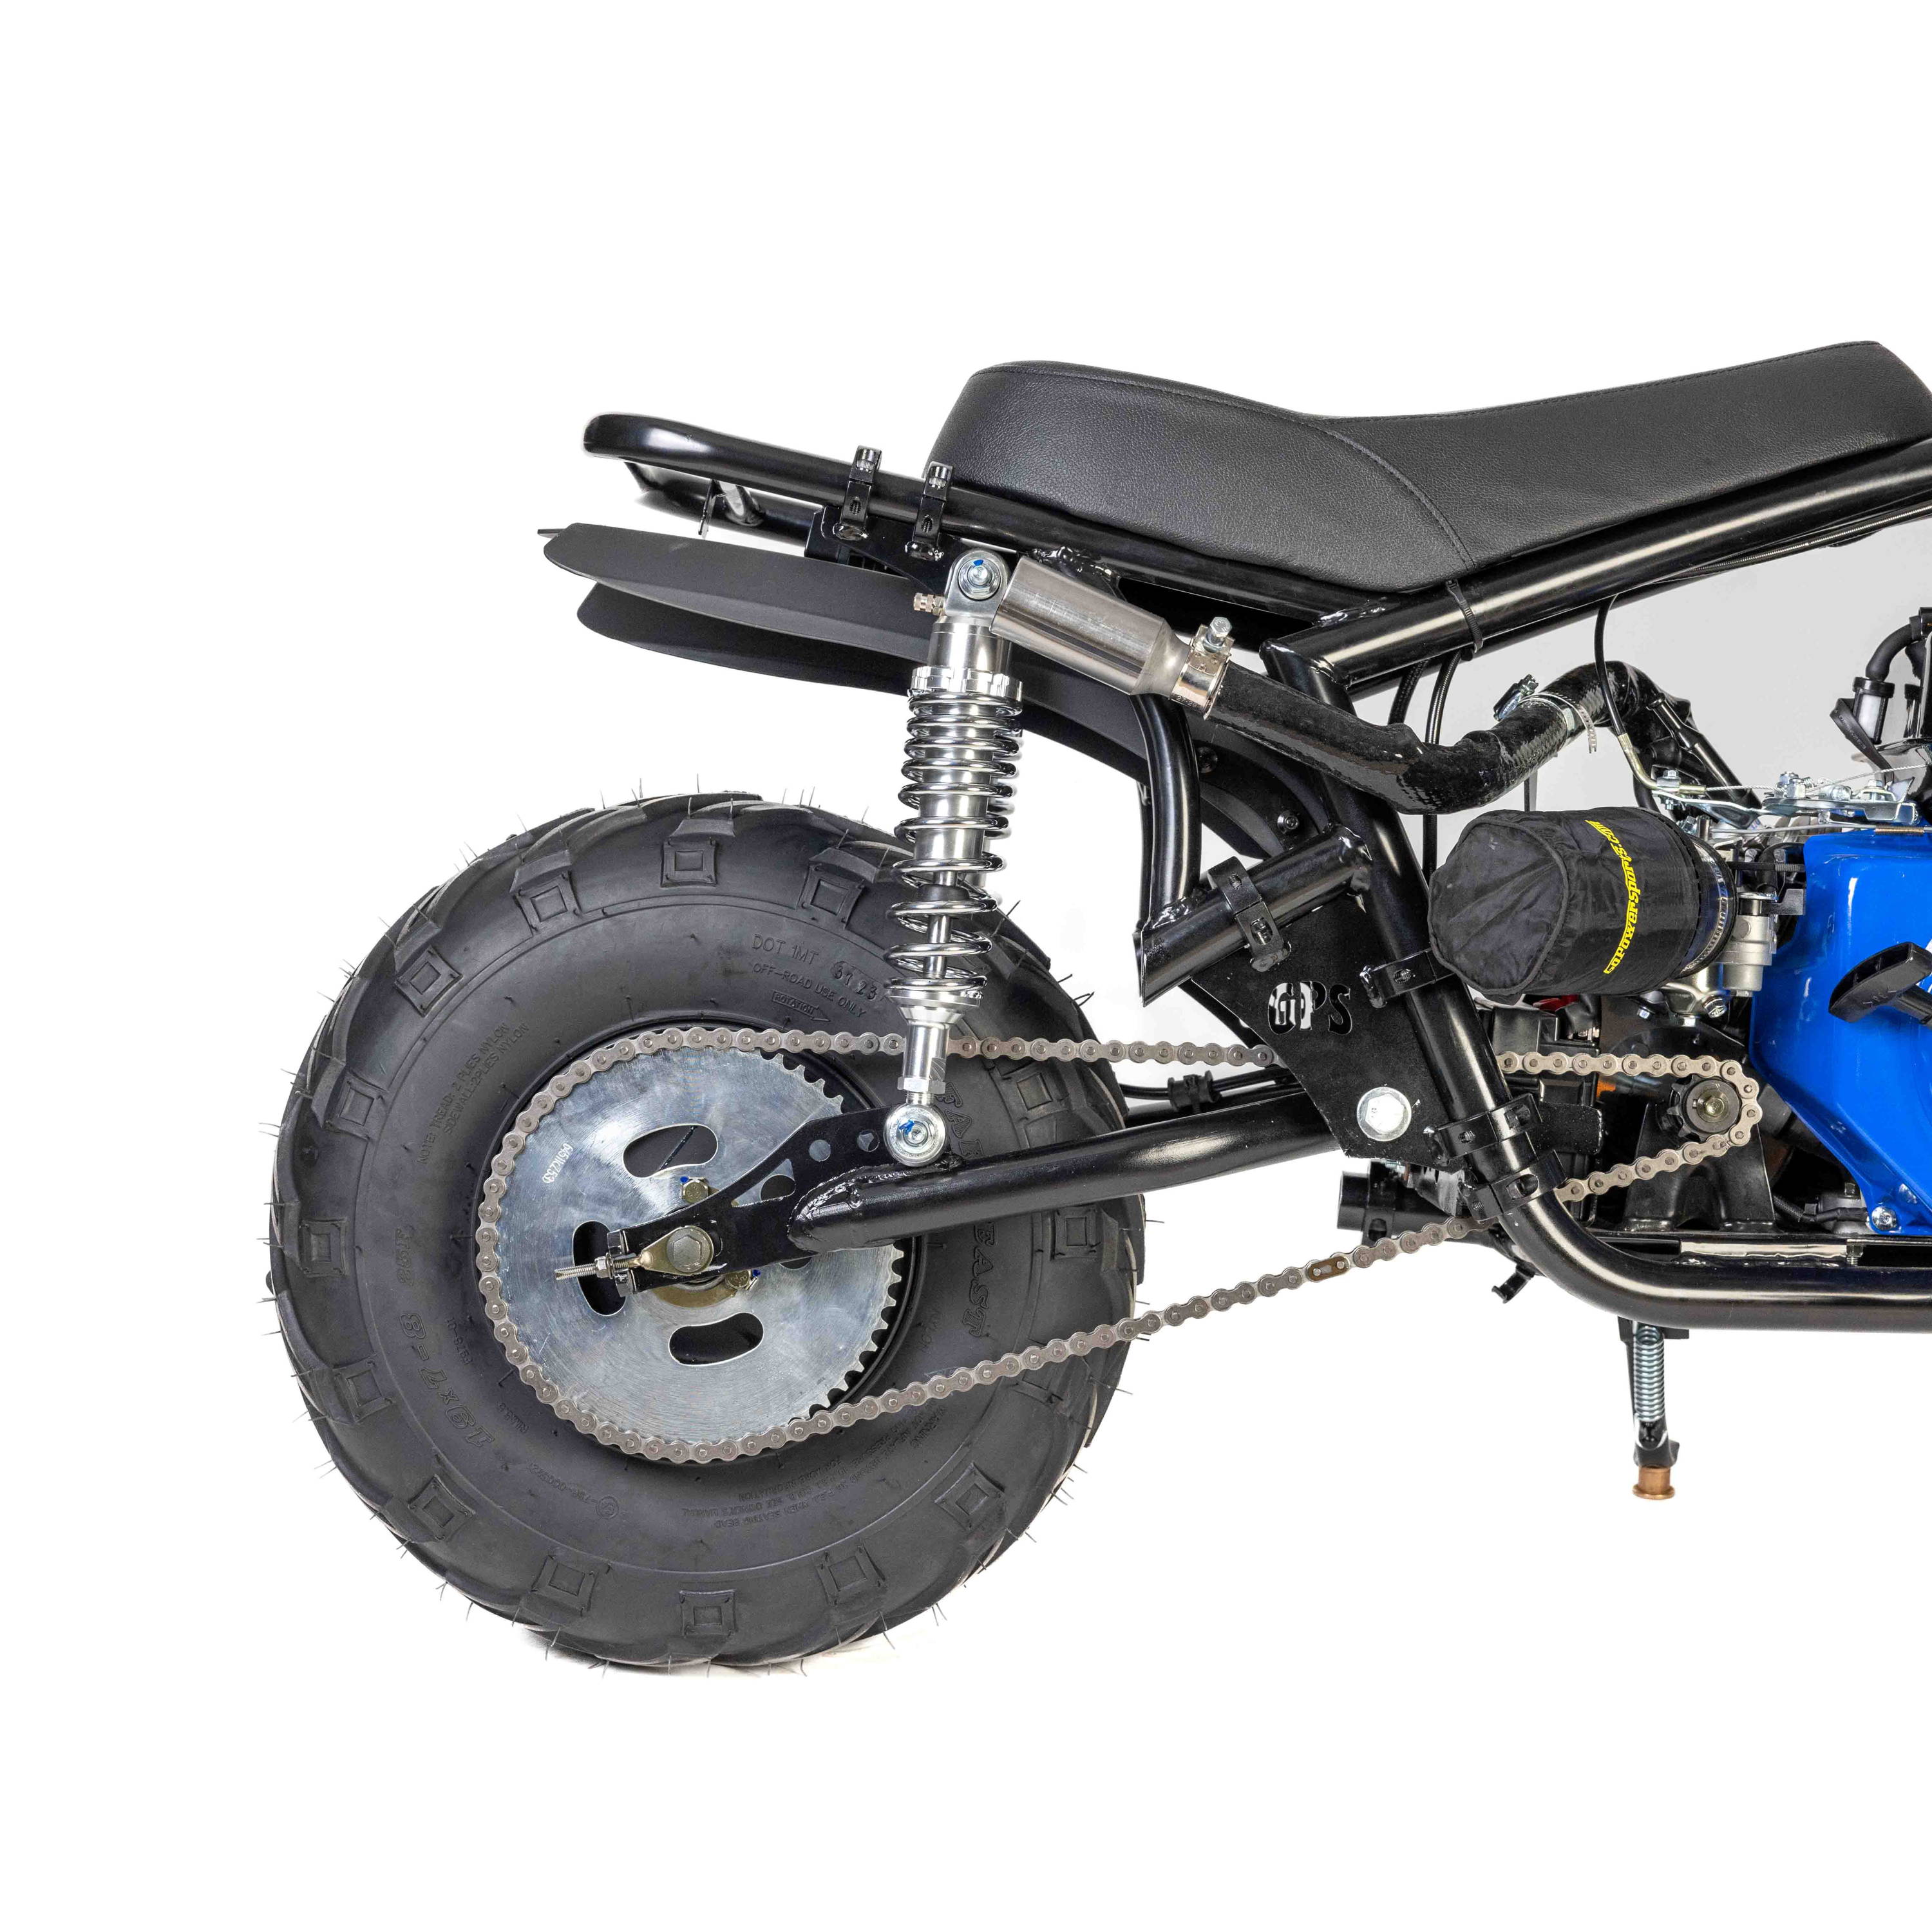 The best mini bike for sale near your